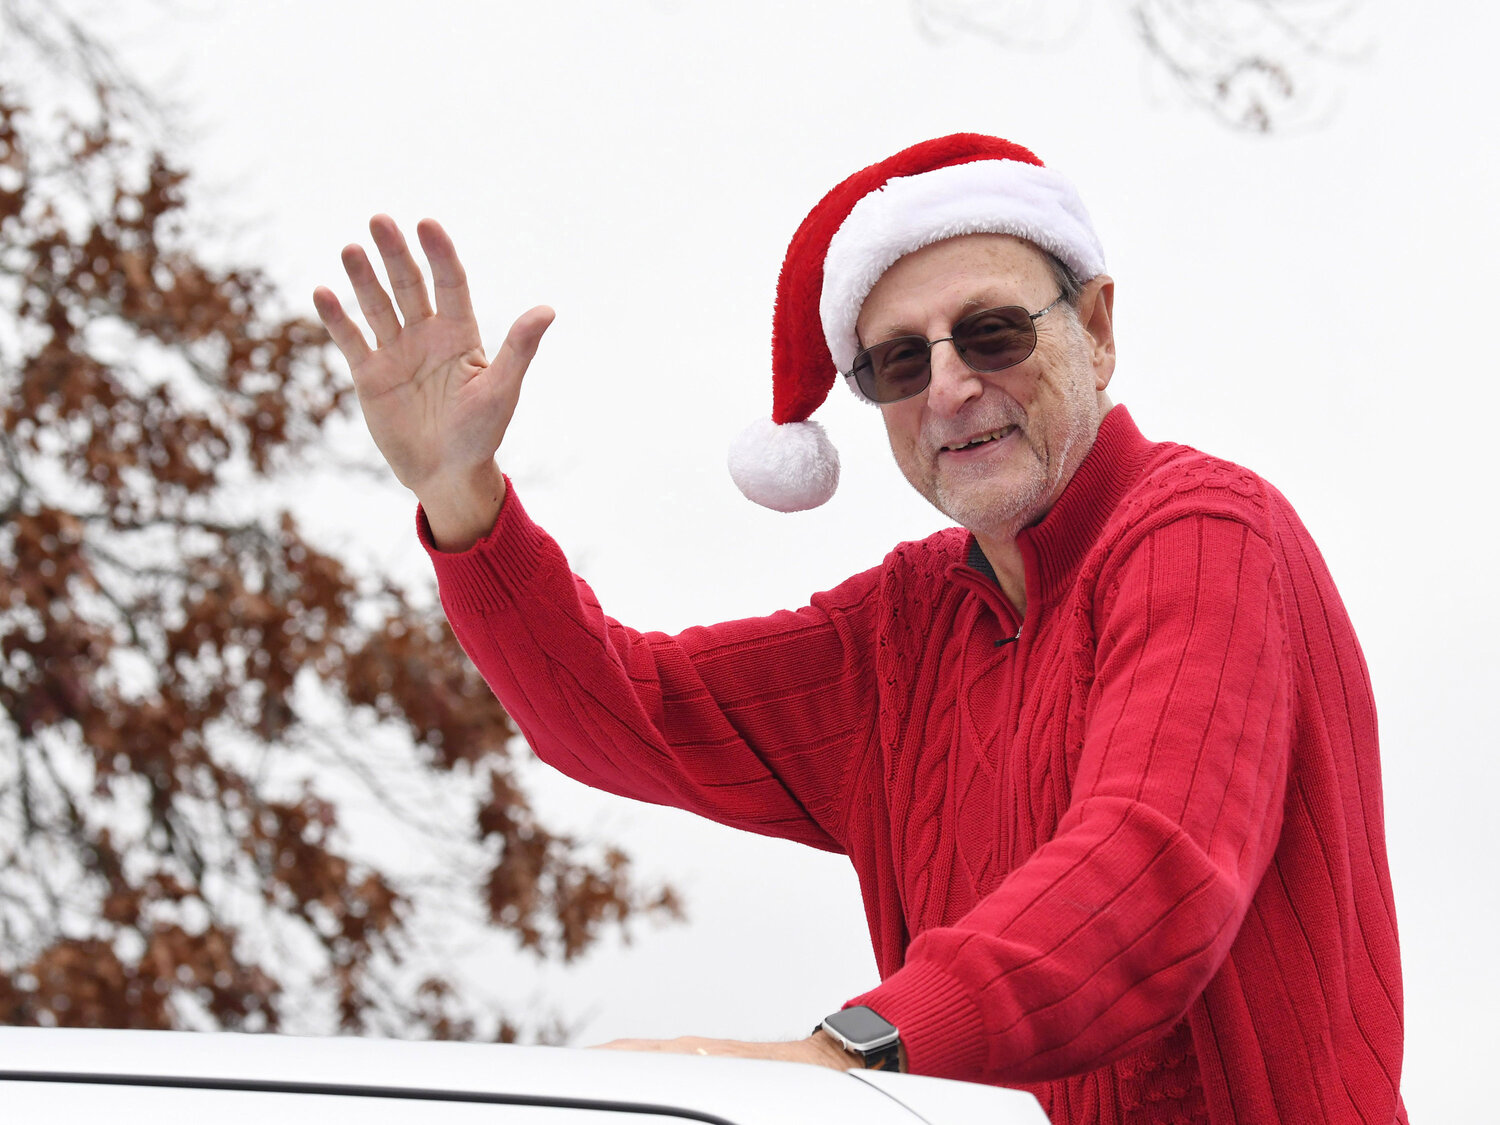 Former Salisbury Mayor served as Parade Marshal of the Sunday event in Downtown Salisbury.